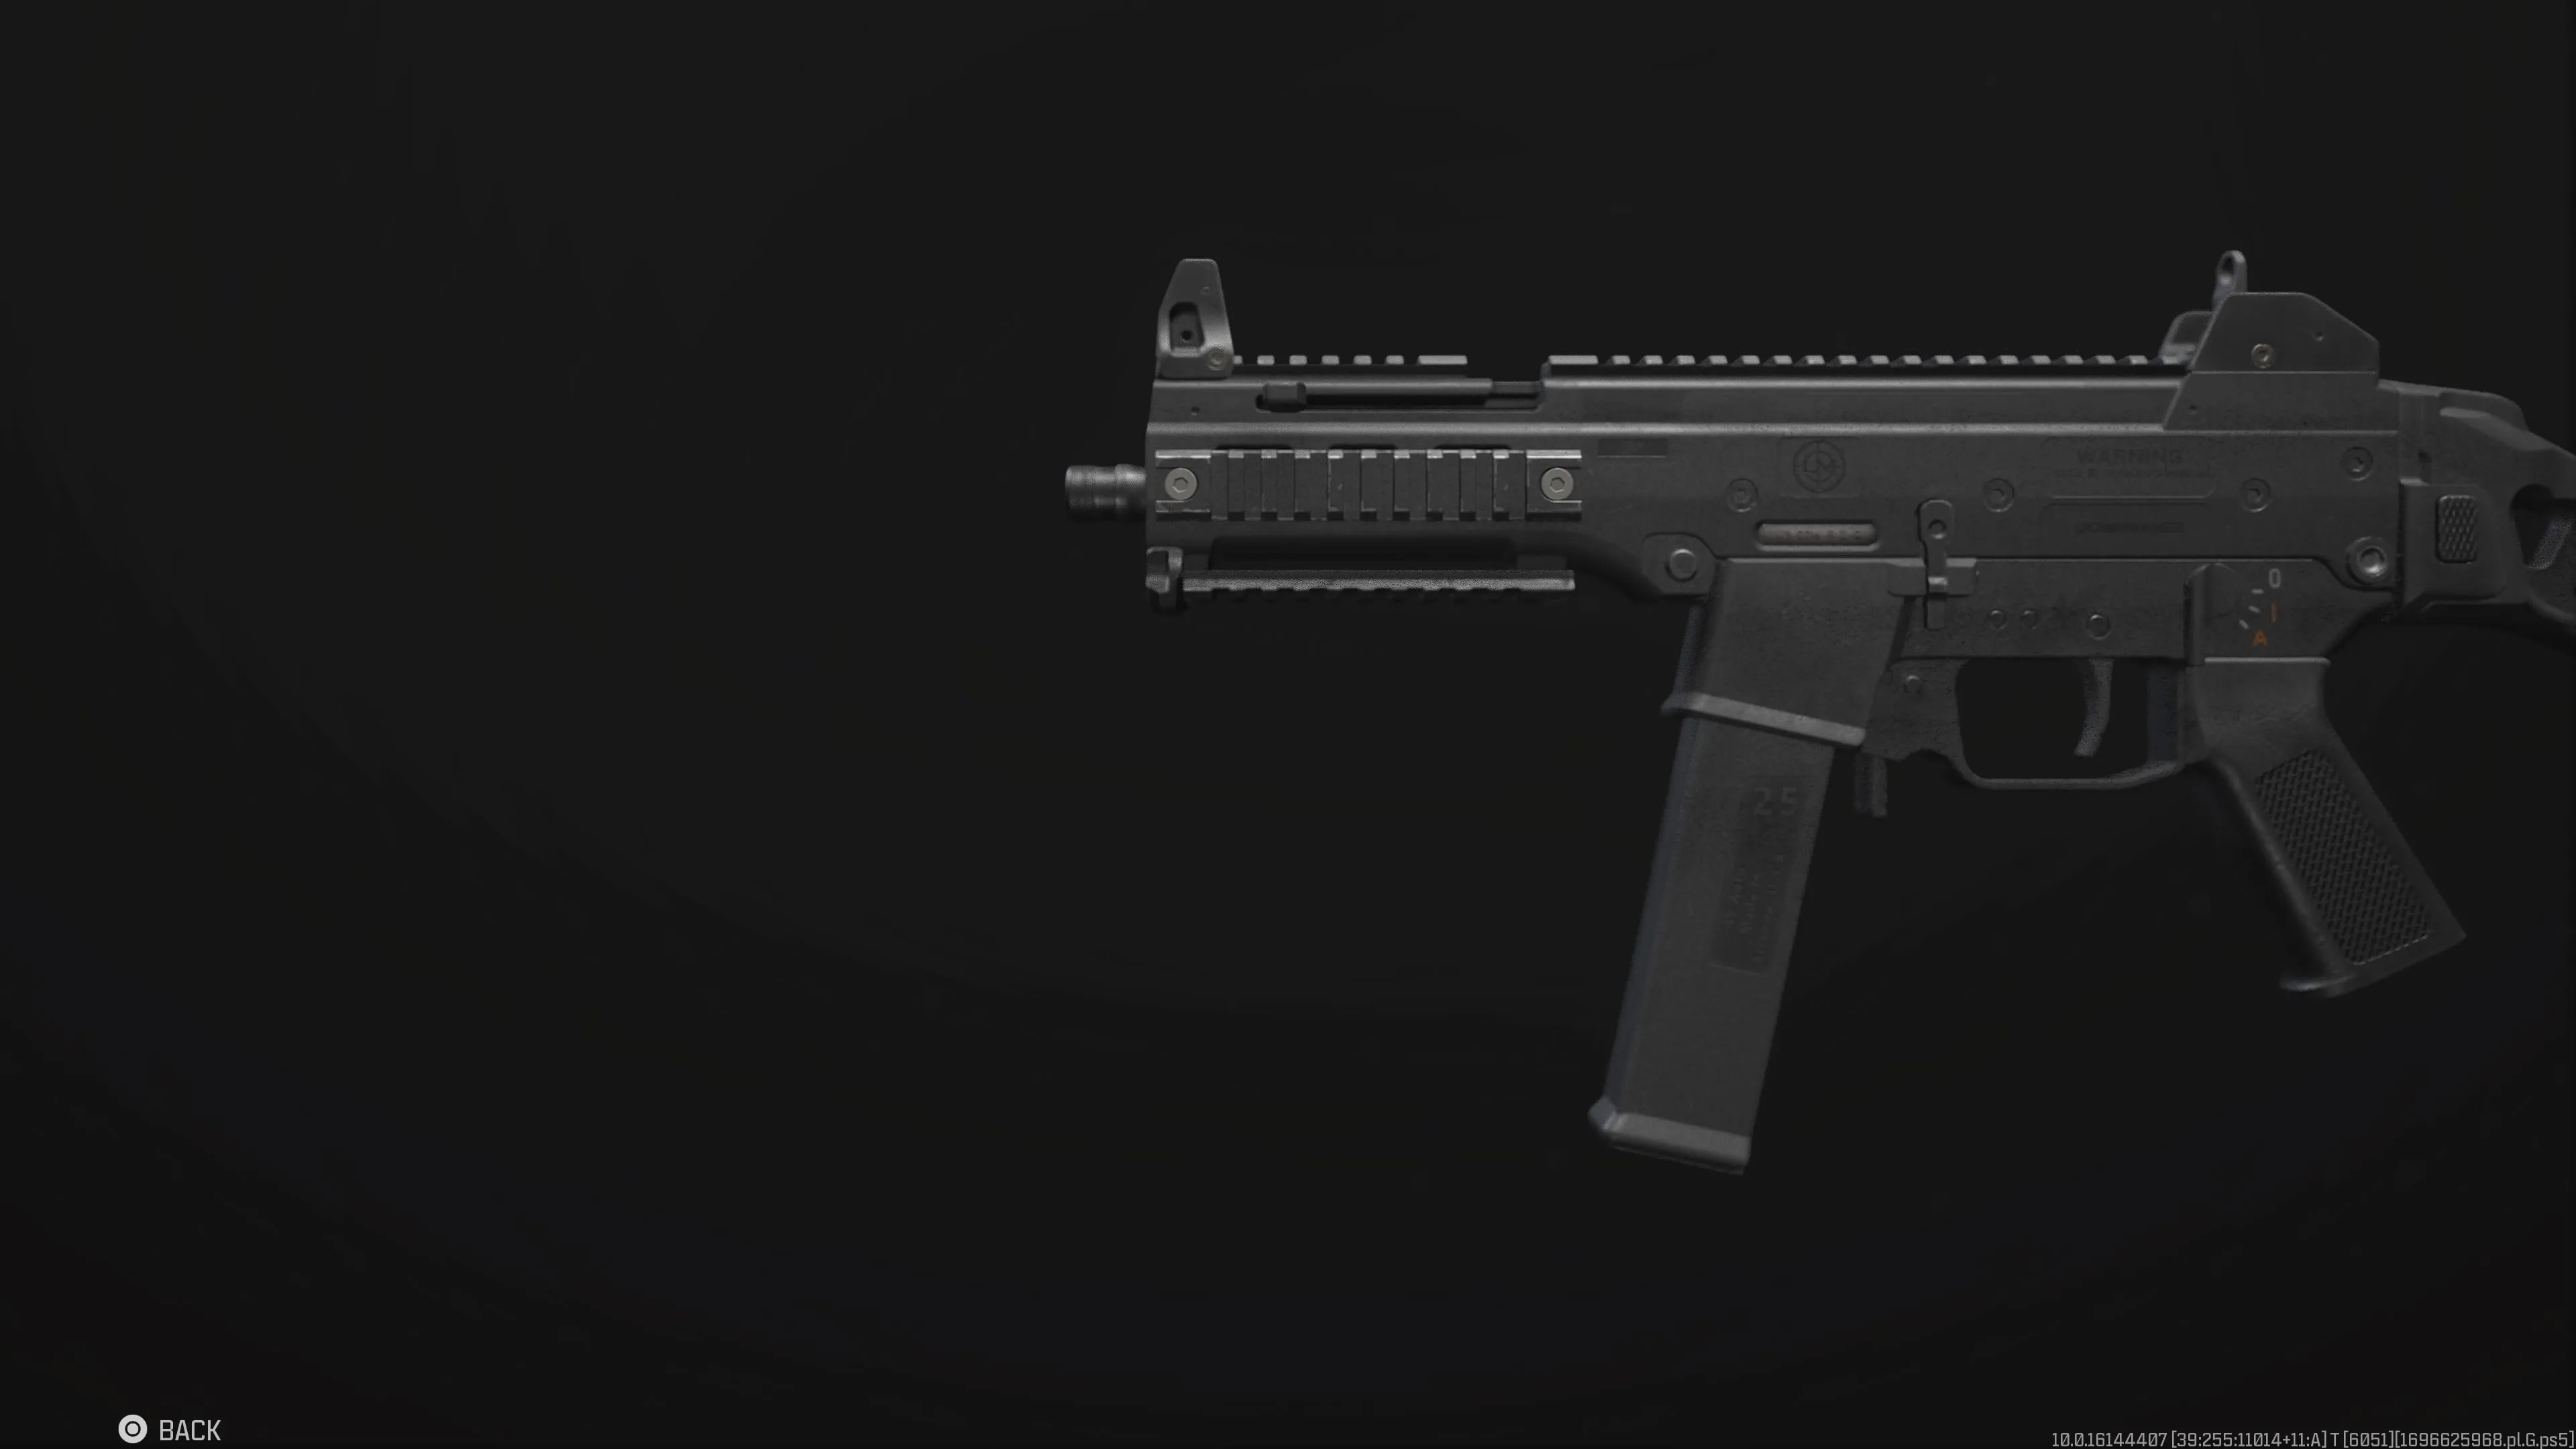 An up-close screenshot of the Striker SMG in MW3.